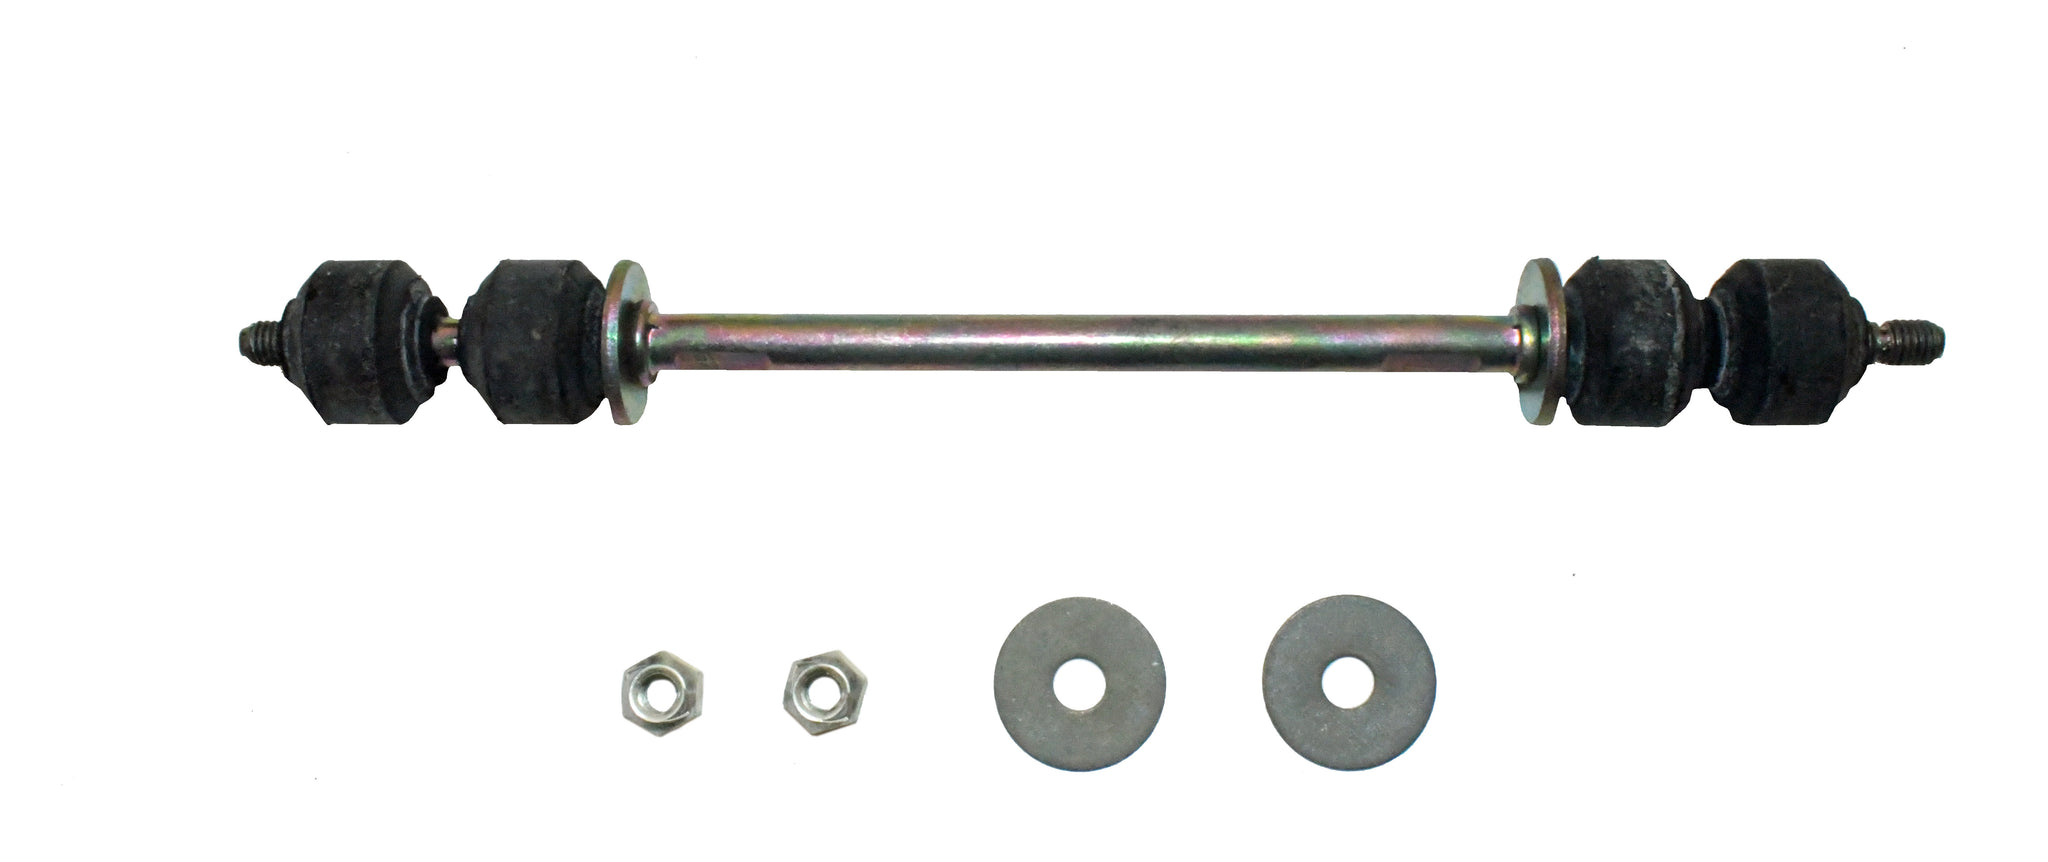 New sway bar link repair kit for 1988-1994 Lincoln Continental E8OY-5A486-A